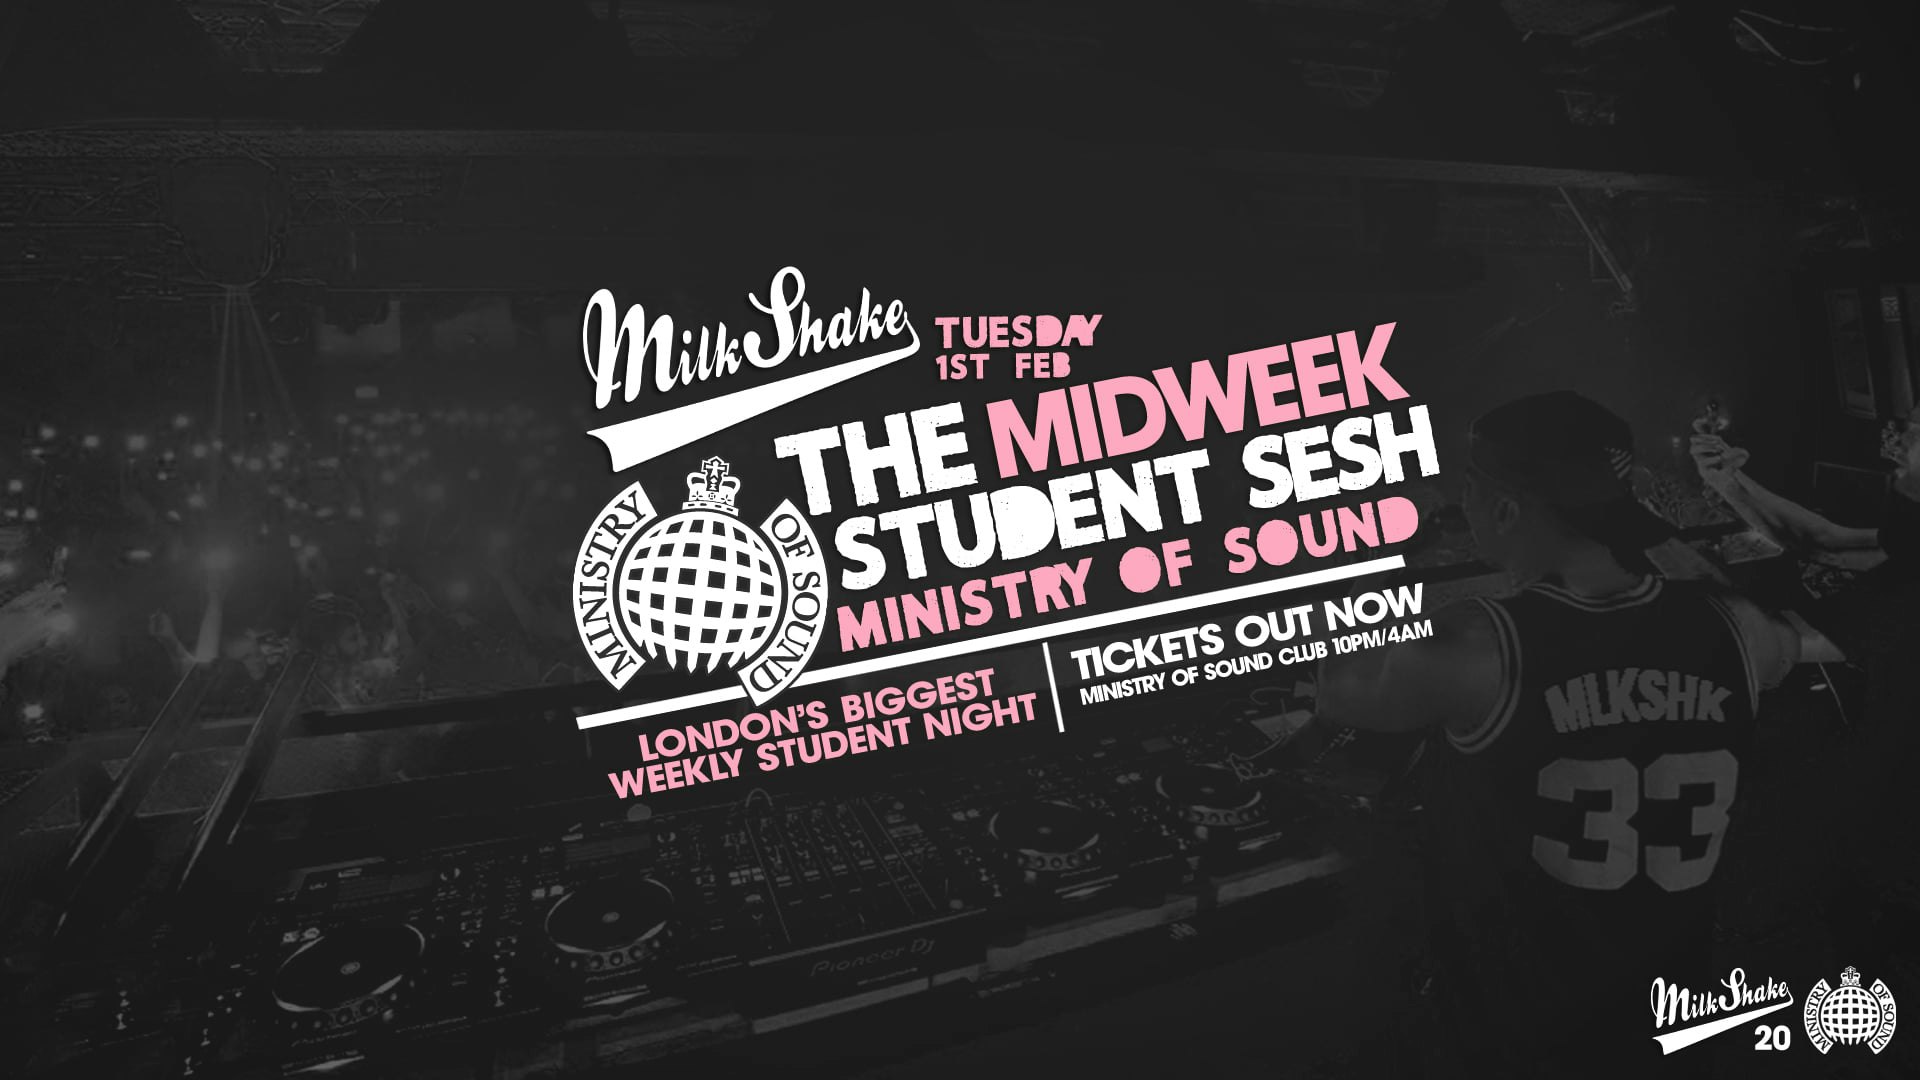 ⚠️  SOLD OUT ⚠️  Milkshake, Ministry of Sound | London’s Biggest Student Night – Feb 1st 2022 ⚠️  SOLD OUT ⚠️